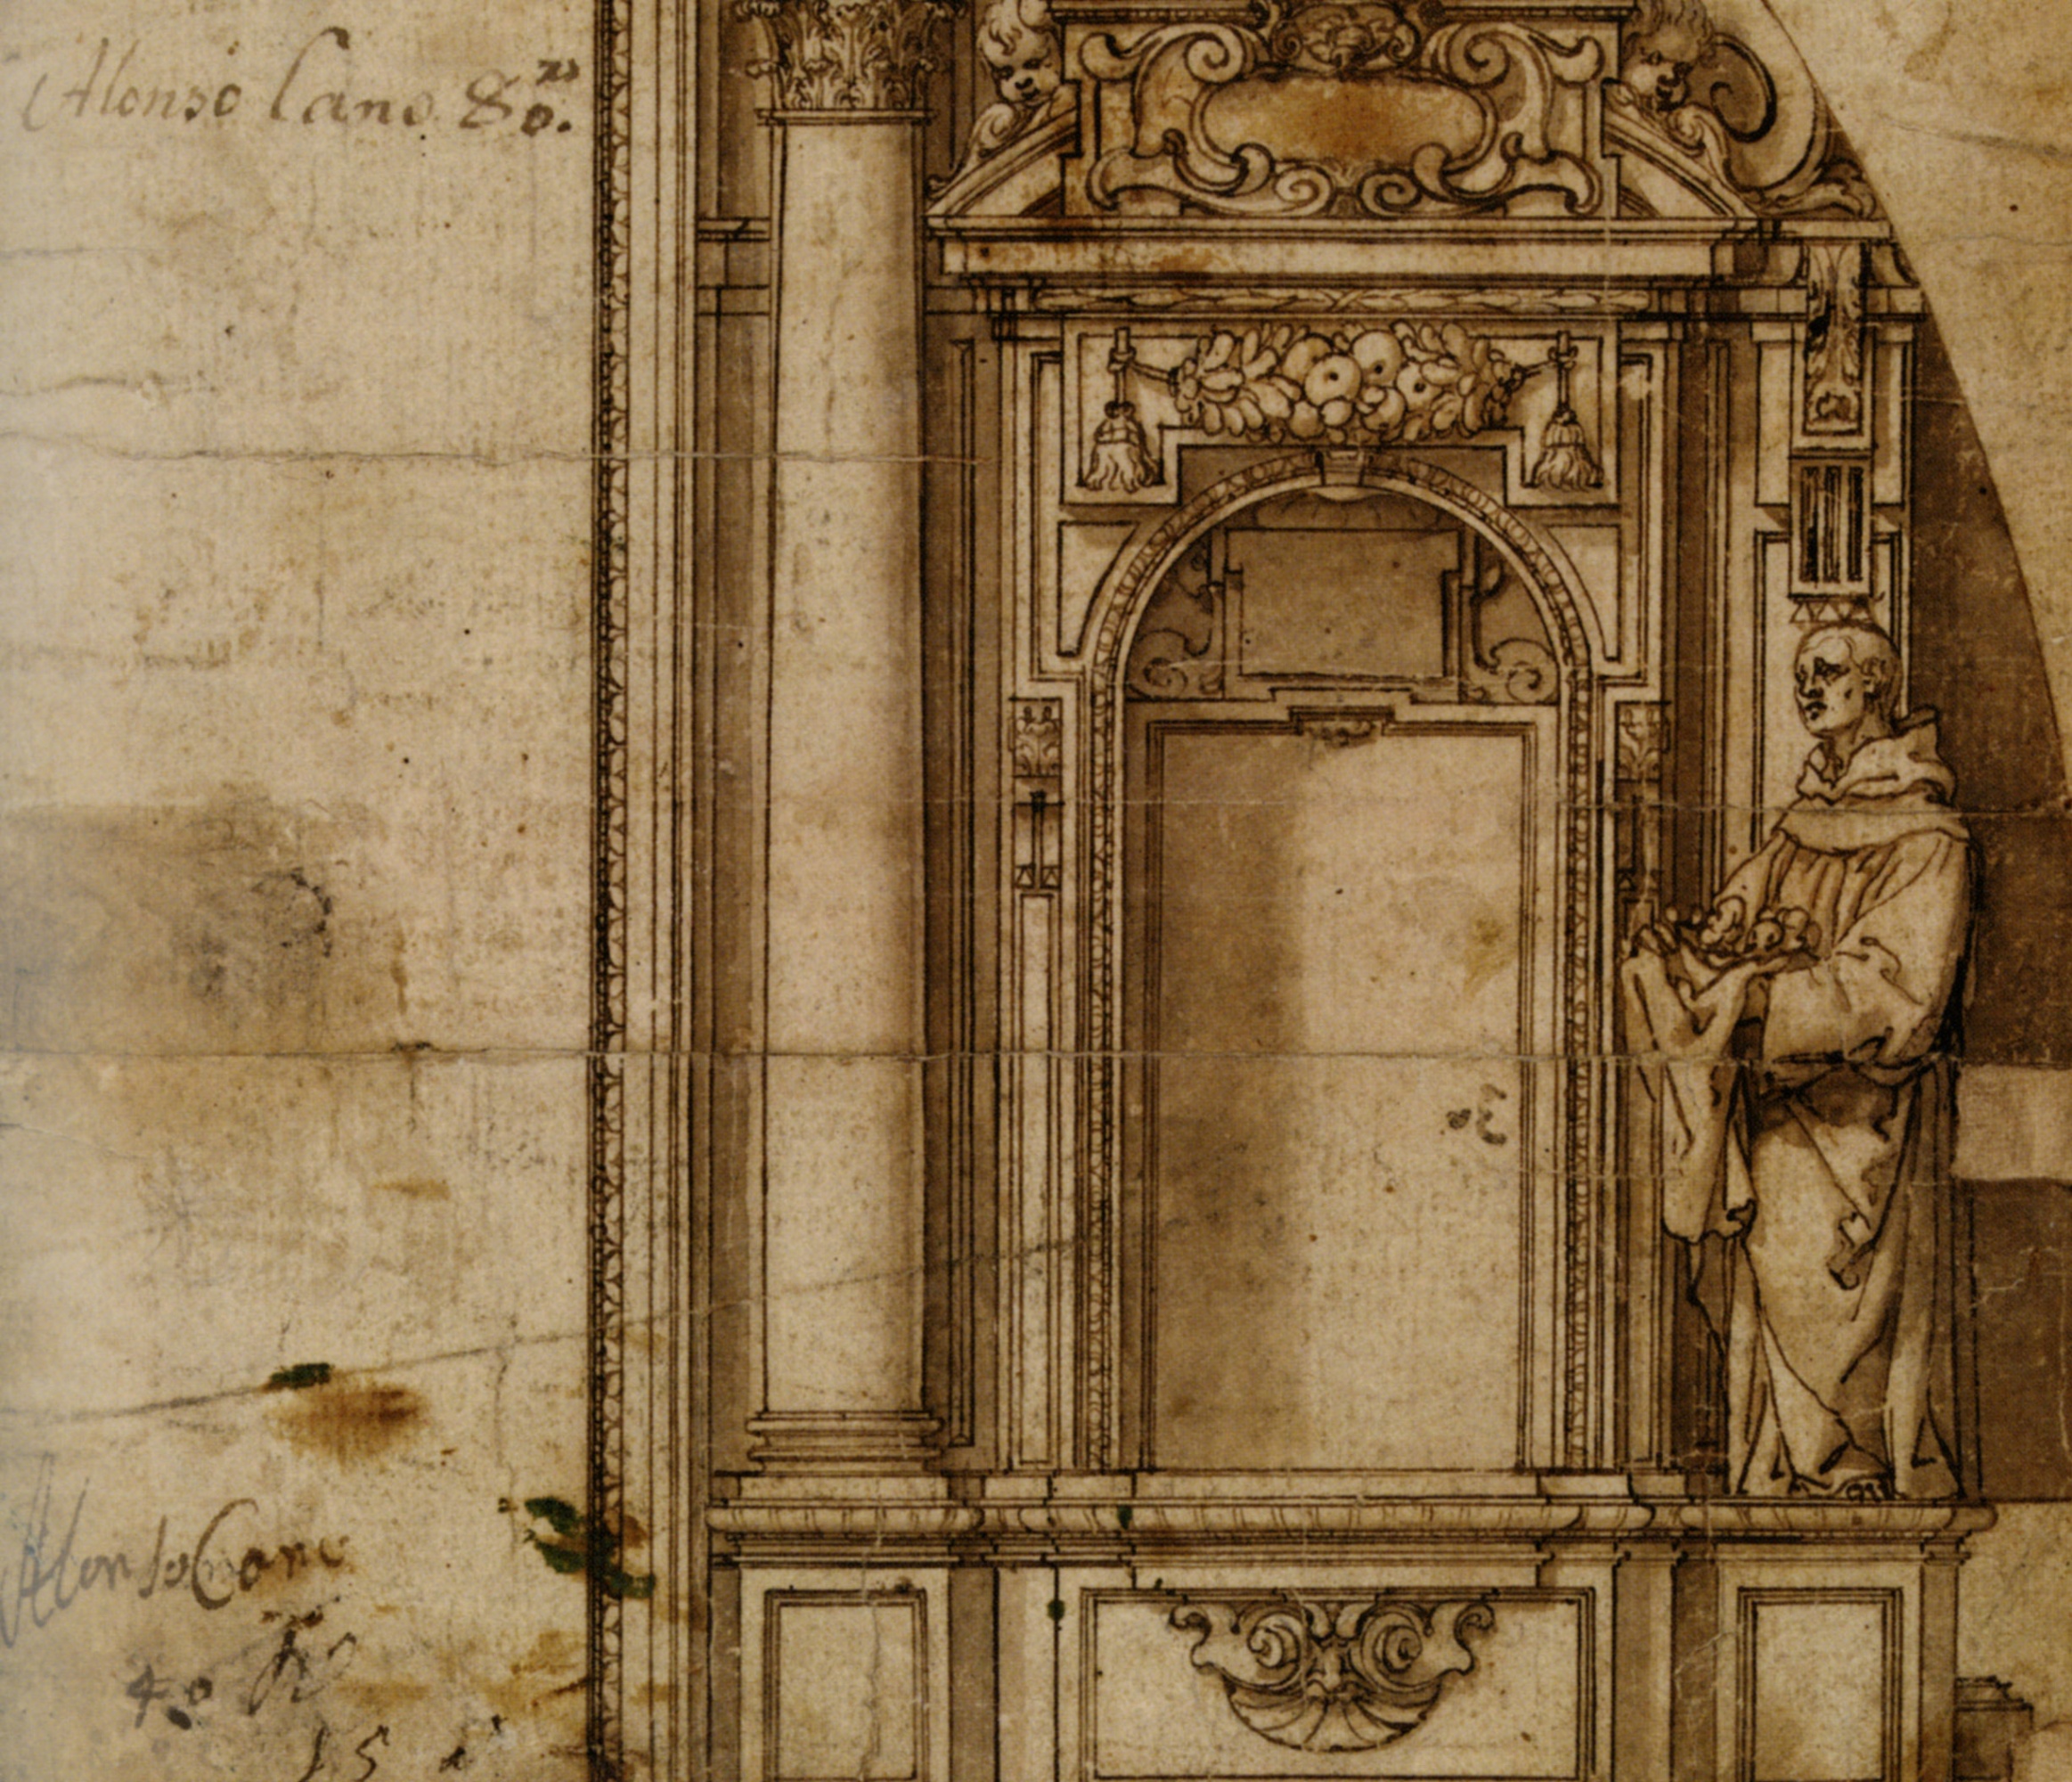 Alonso Cano, Project for a Retable, also known Architectural Study, Hamburg, Kunsthalle, 1630-1635